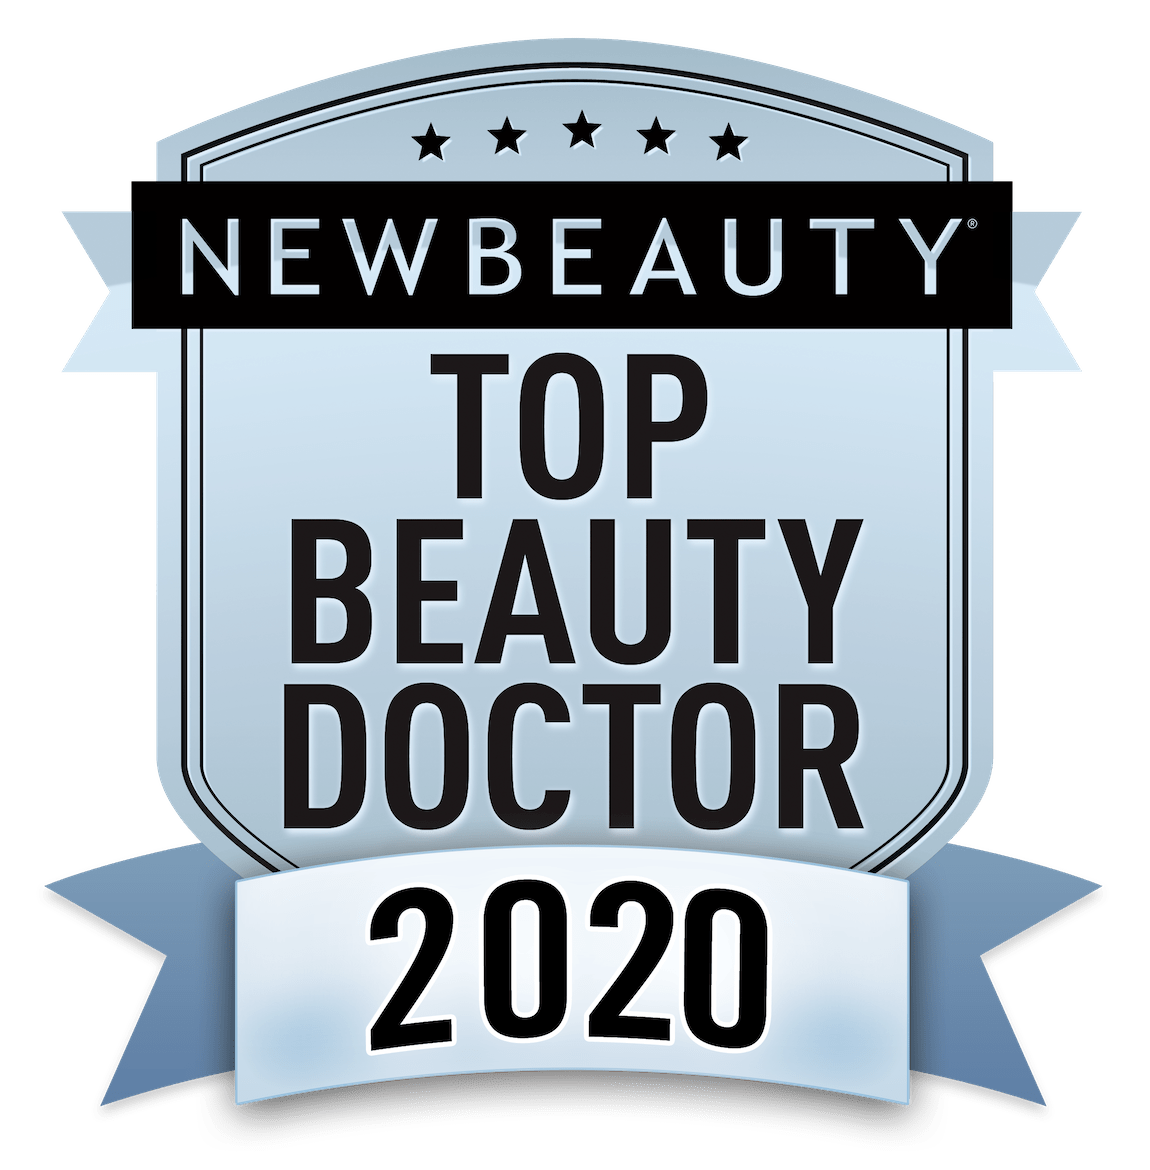 New Beauty Top Doctor 2020